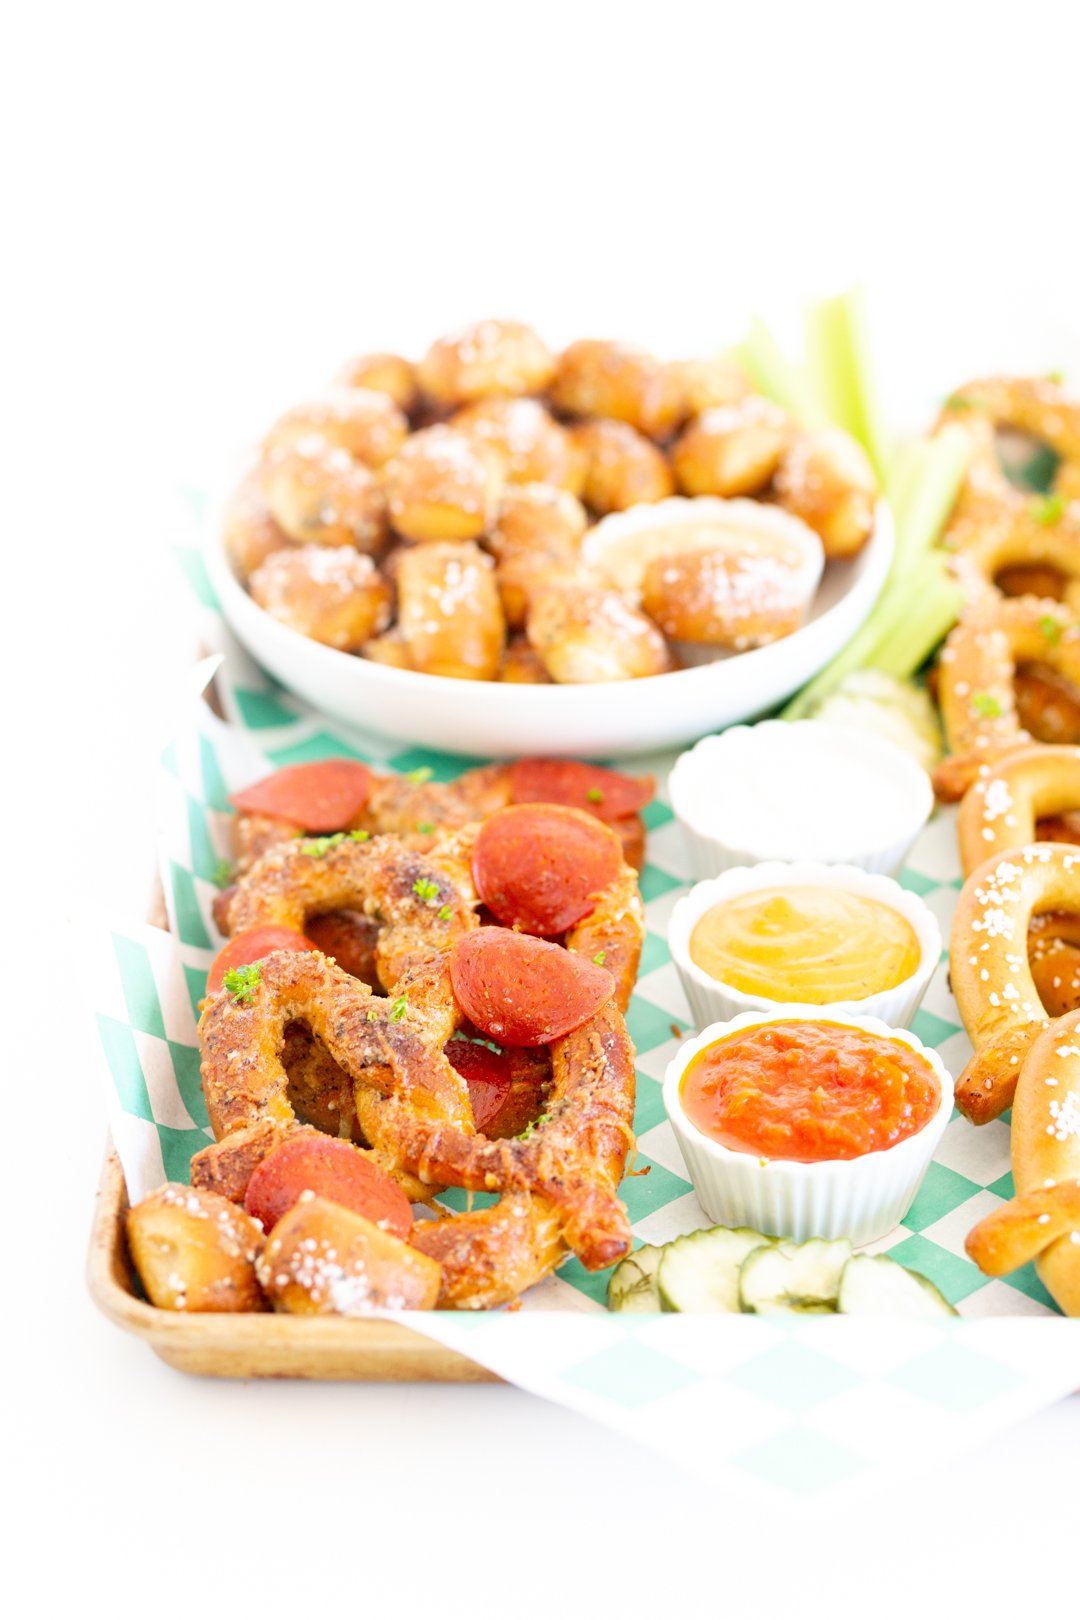 angled down view of game day snacking board loaded with soft pretzel options in different shapes and flavors. Dipping sauces in small dipping dishes.